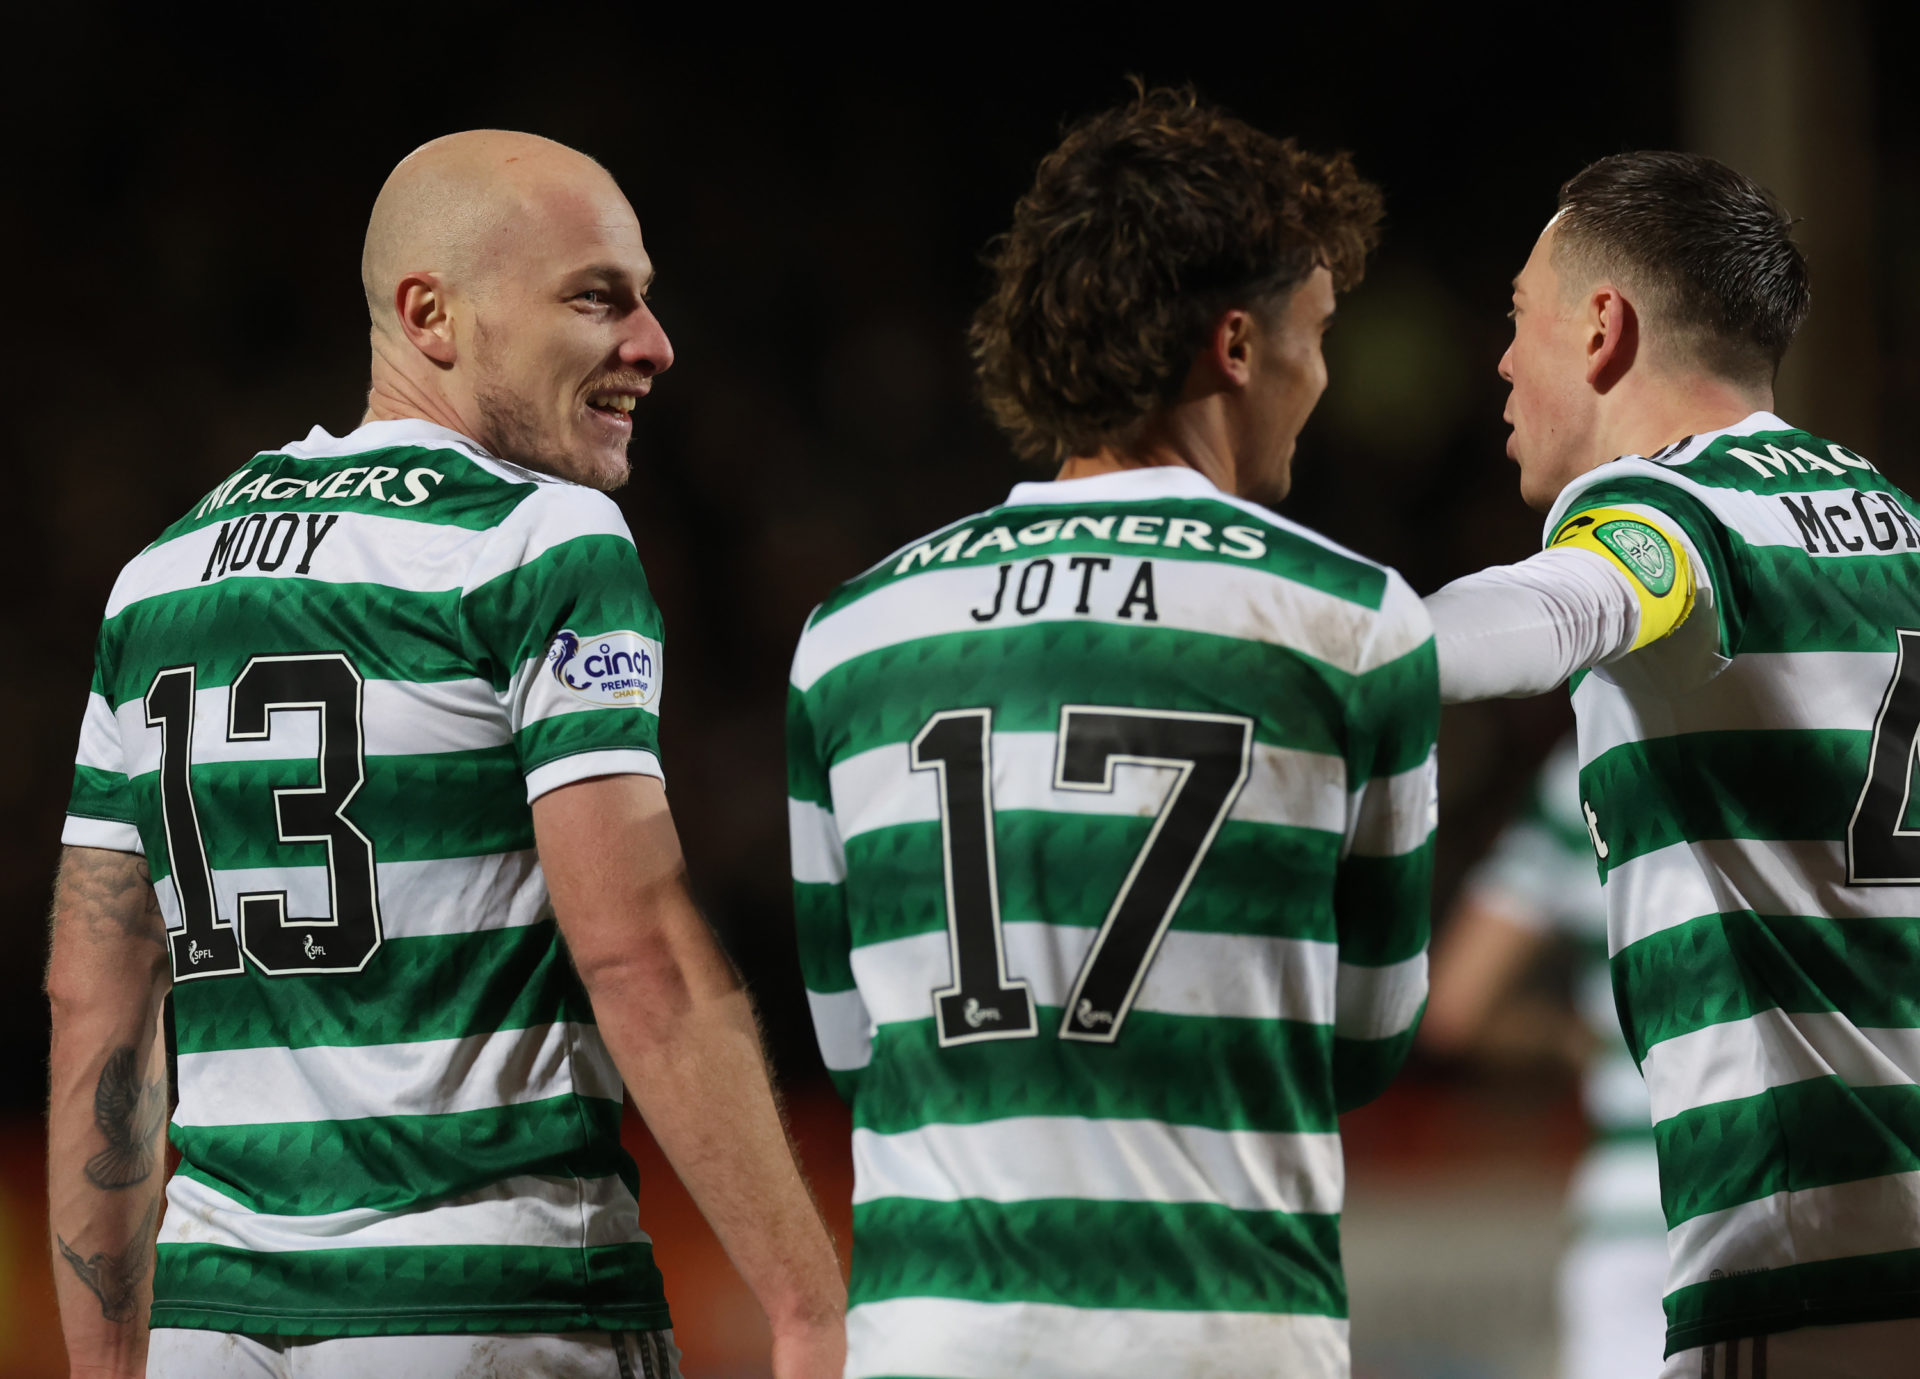 Mooy has become an important player for Celtic